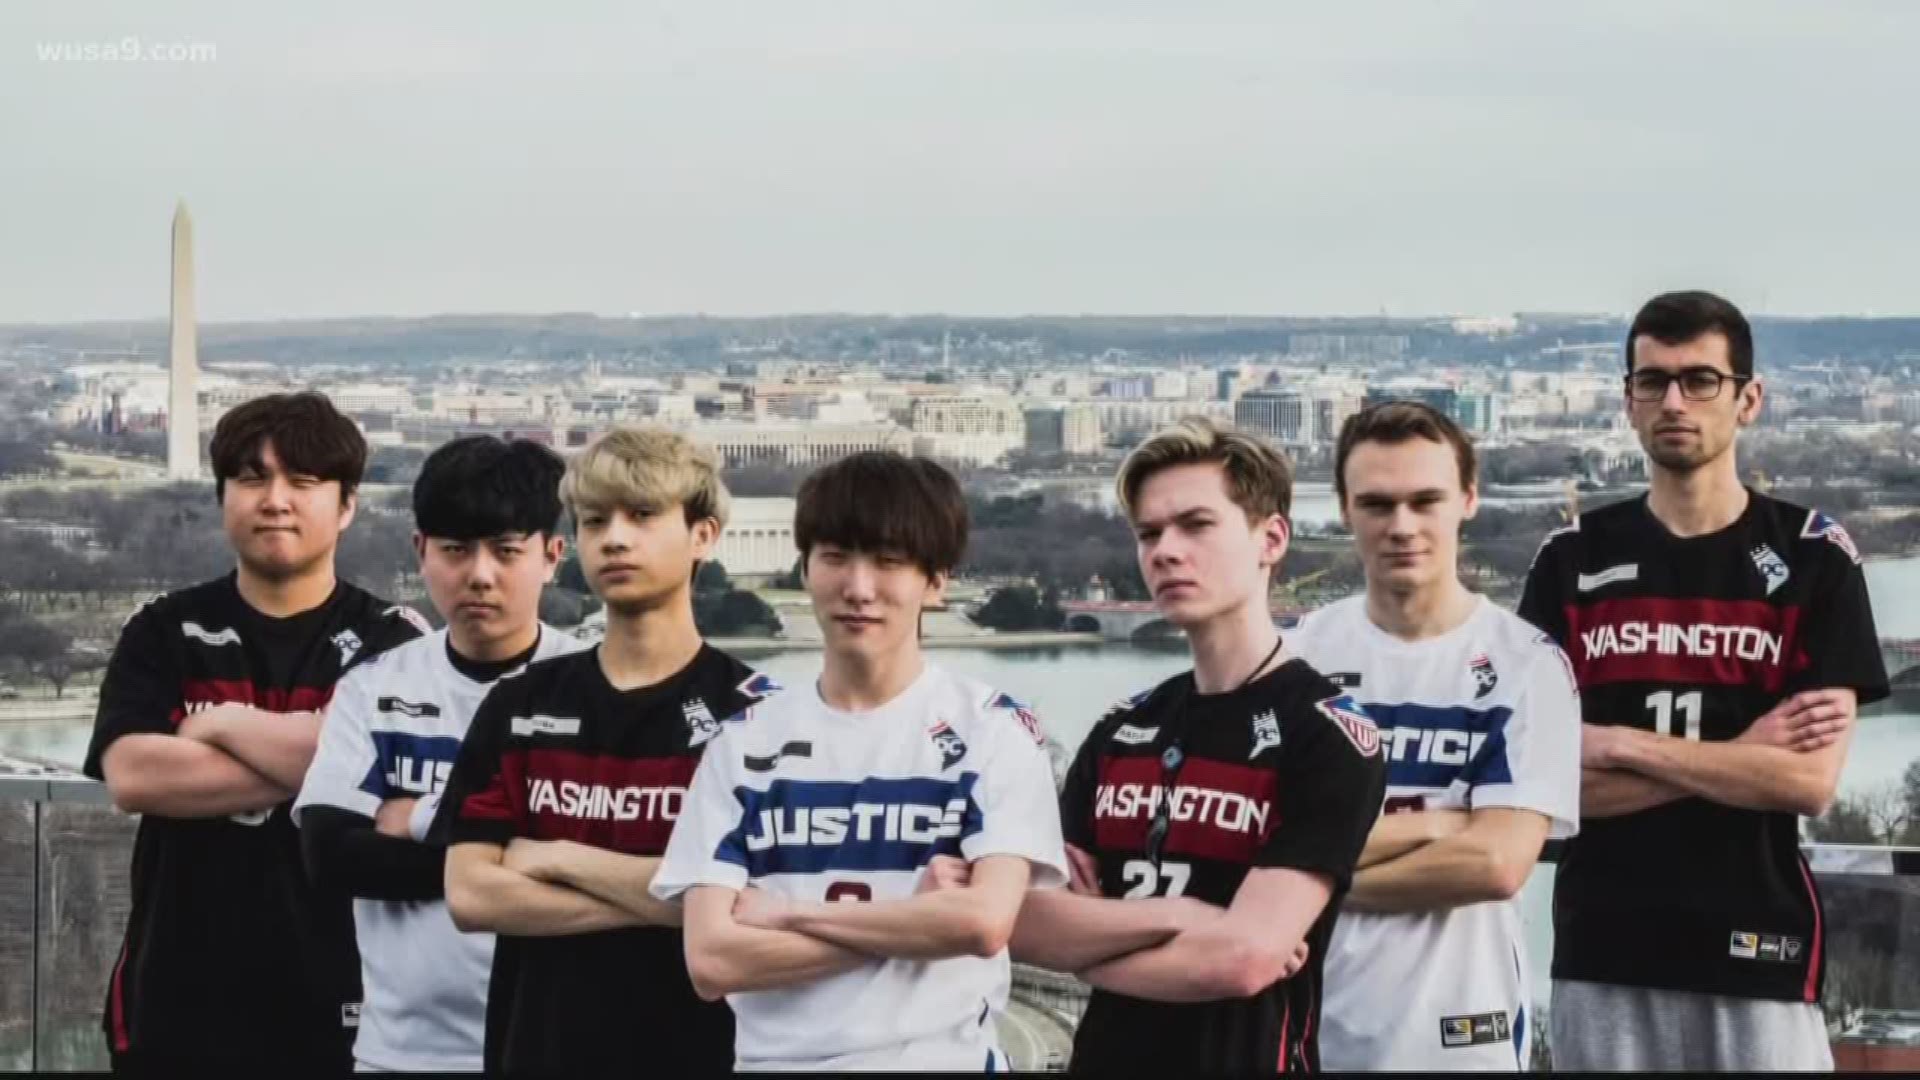 The Washington Justice’s roster includes some of the best Overwatch players in the world, and they don’t just play for fun – thousands of dollars are on the line.